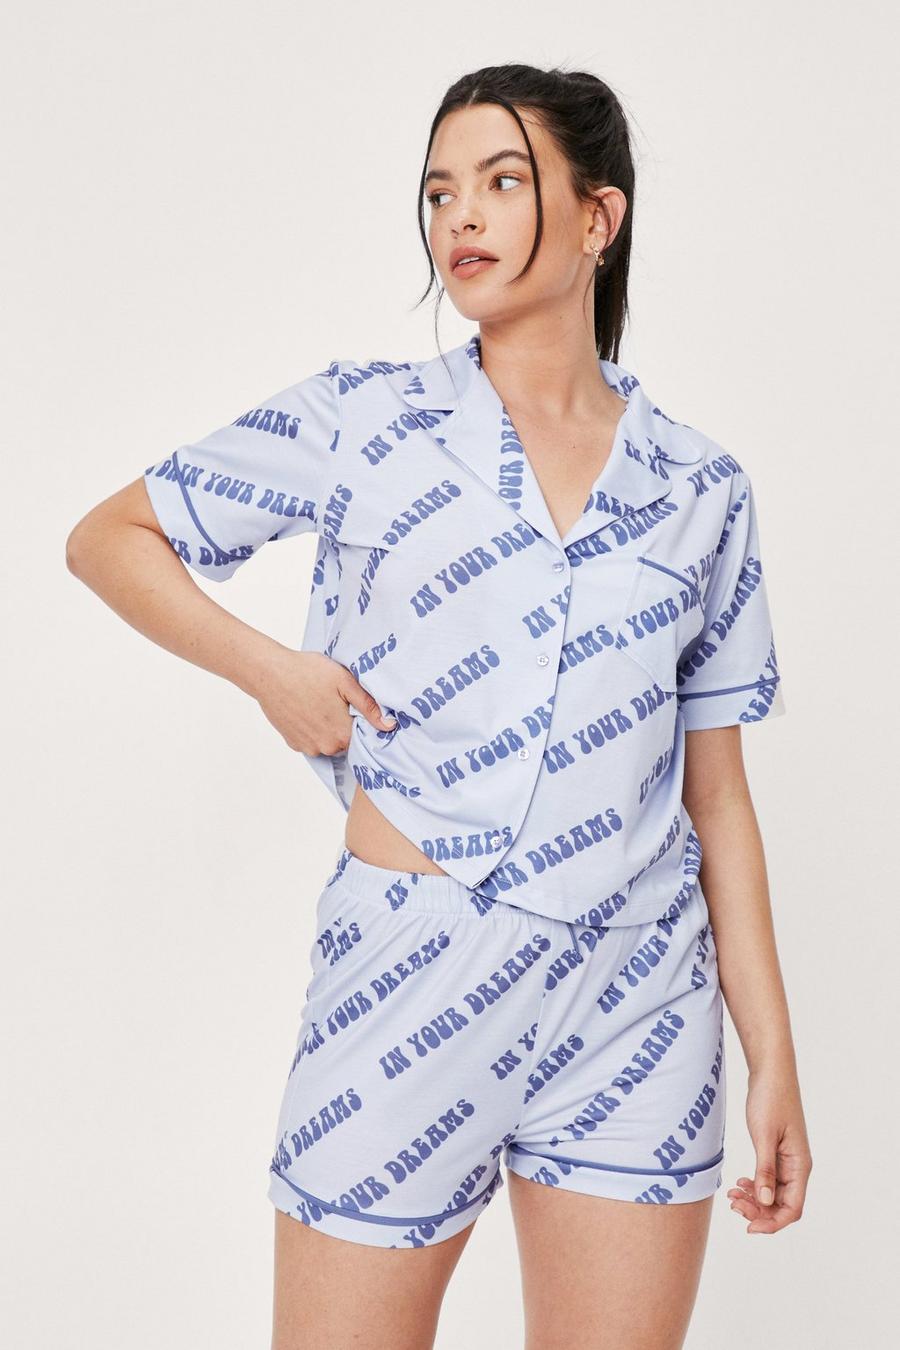 In Your Dreams Graphic Pyjama Shirt and Short Set